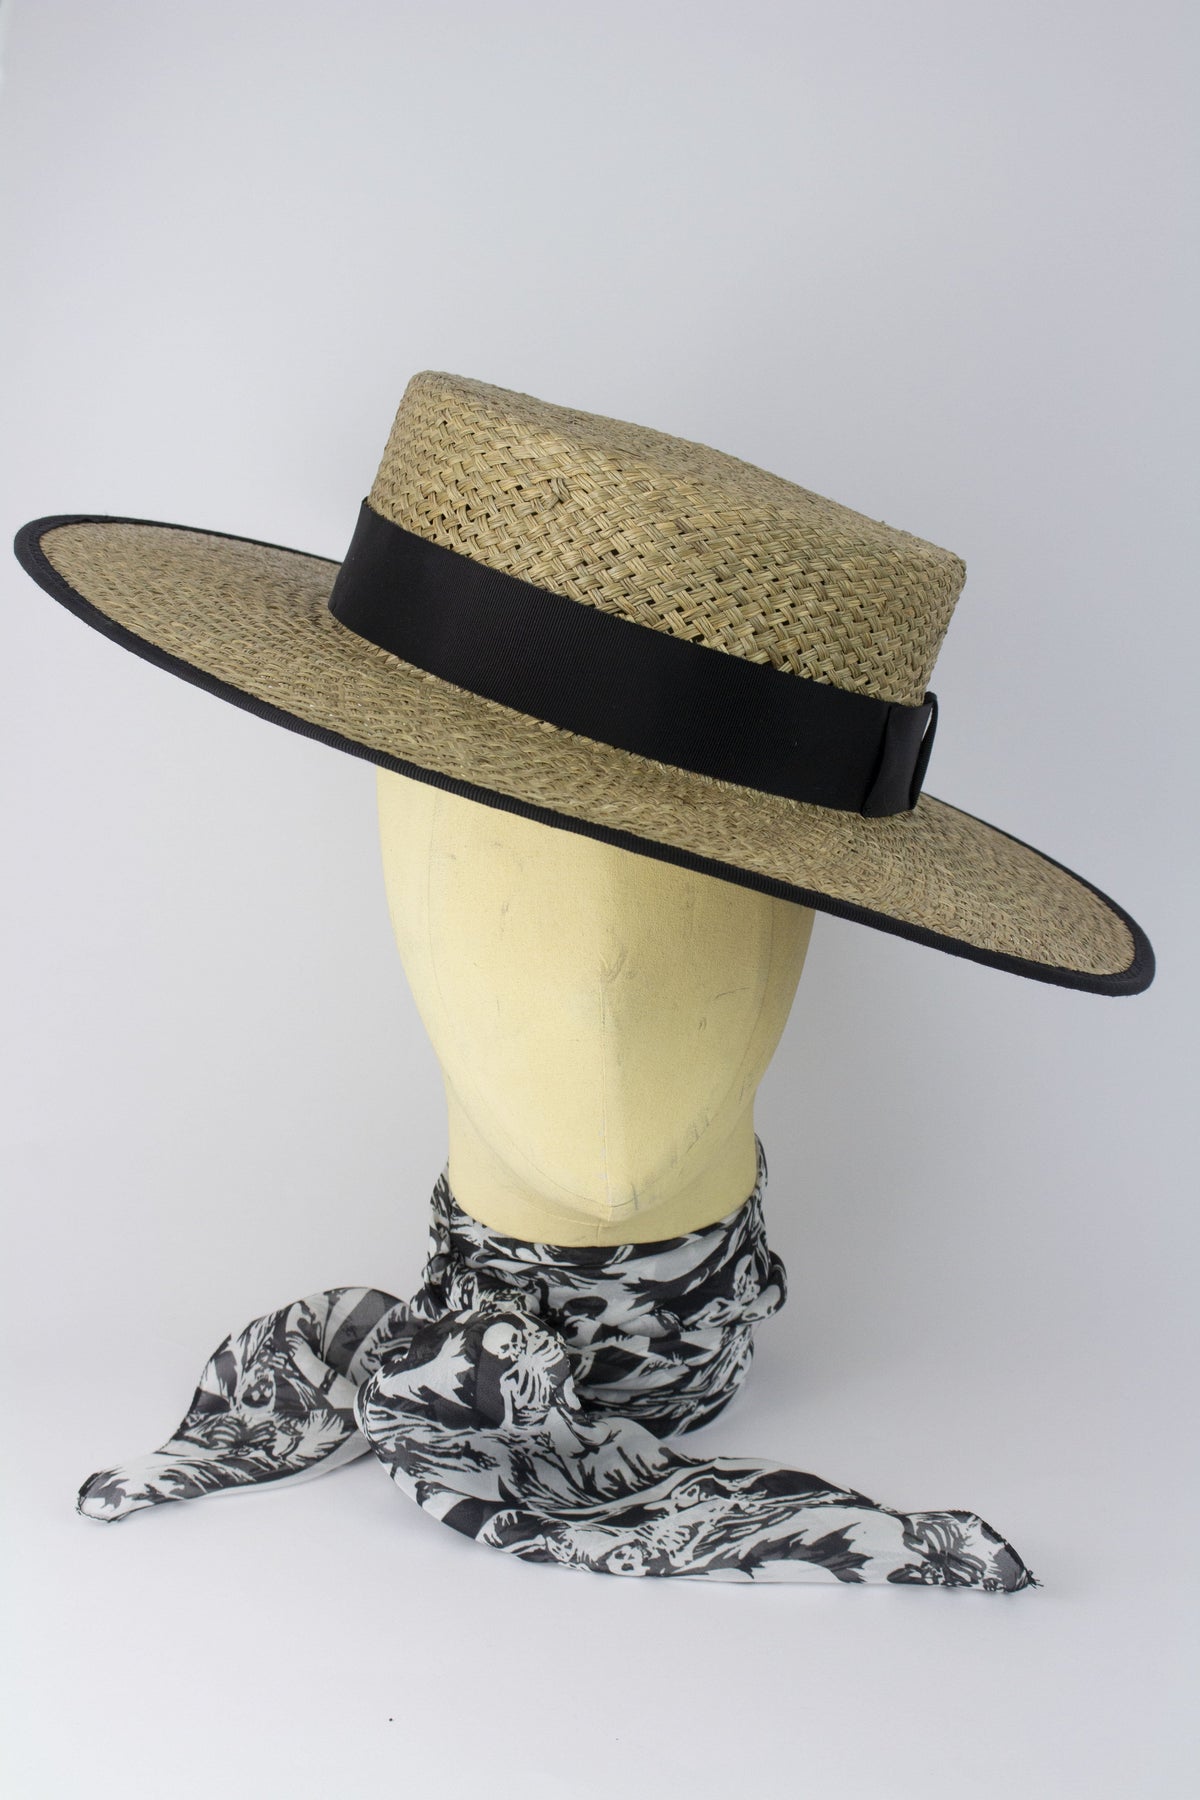 SANDEMAN HAT IN STRAW-hats-A Child Of The Jago